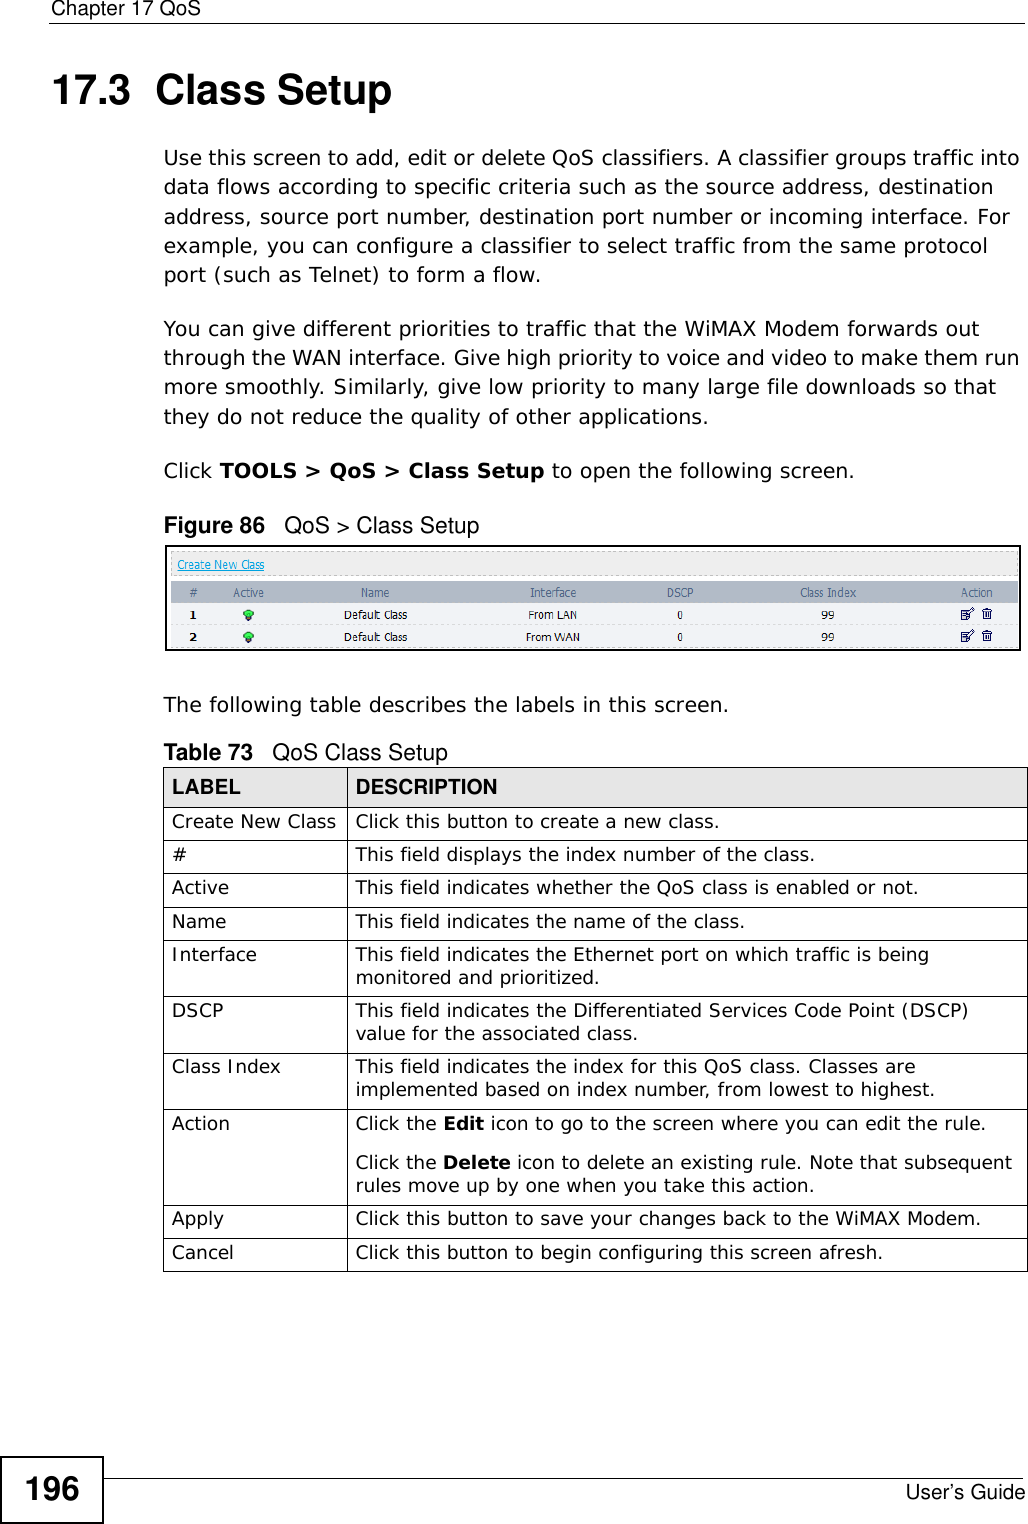 Chapter 17 QoSUser’s Guide19617.3  Class SetupUse this screen to add, edit or delete QoS classifiers. A classifier groups traffic into data flows according to specific criteria such as the source address, destination address, source port number, destination port number or incoming interface. For example, you can configure a classifier to select traffic from the same protocol port (such as Telnet) to form a flow.You can give different priorities to traffic that the WiMAX Modem forwards out through the WAN interface. Give high priority to voice and video to make them run more smoothly. Similarly, give low priority to many large file downloads so that they do not reduce the quality of other applications. Click TOOLS &gt; QoS &gt; Class Setup to open the following screen.Figure 86   QoS &gt; Class SetupThe following table describes the labels in this screen.  Table 73   QoS Class SetupLABEL DESCRIPTIONCreate New Class Click this button to create a new class.#  This field displays the index number of the class.Active This field indicates whether the QoS class is enabled or not.Name This field indicates the name of the class.Interface This field indicates the Ethernet port on which traffic is being monitored and prioritized.DSCP This field indicates the Differentiated Services Code Point (DSCP) value for the associated class.Class Index This field indicates the index for this QoS class. Classes are implemented based on index number, from lowest to highest.Action Click the Edit icon to go to the screen where you can edit the rule.Click the Delete icon to delete an existing rule. Note that subsequent rules move up by one when you take this action.Apply Click this button to save your changes back to the WiMAX Modem.Cancel Click this button to begin configuring this screen afresh.